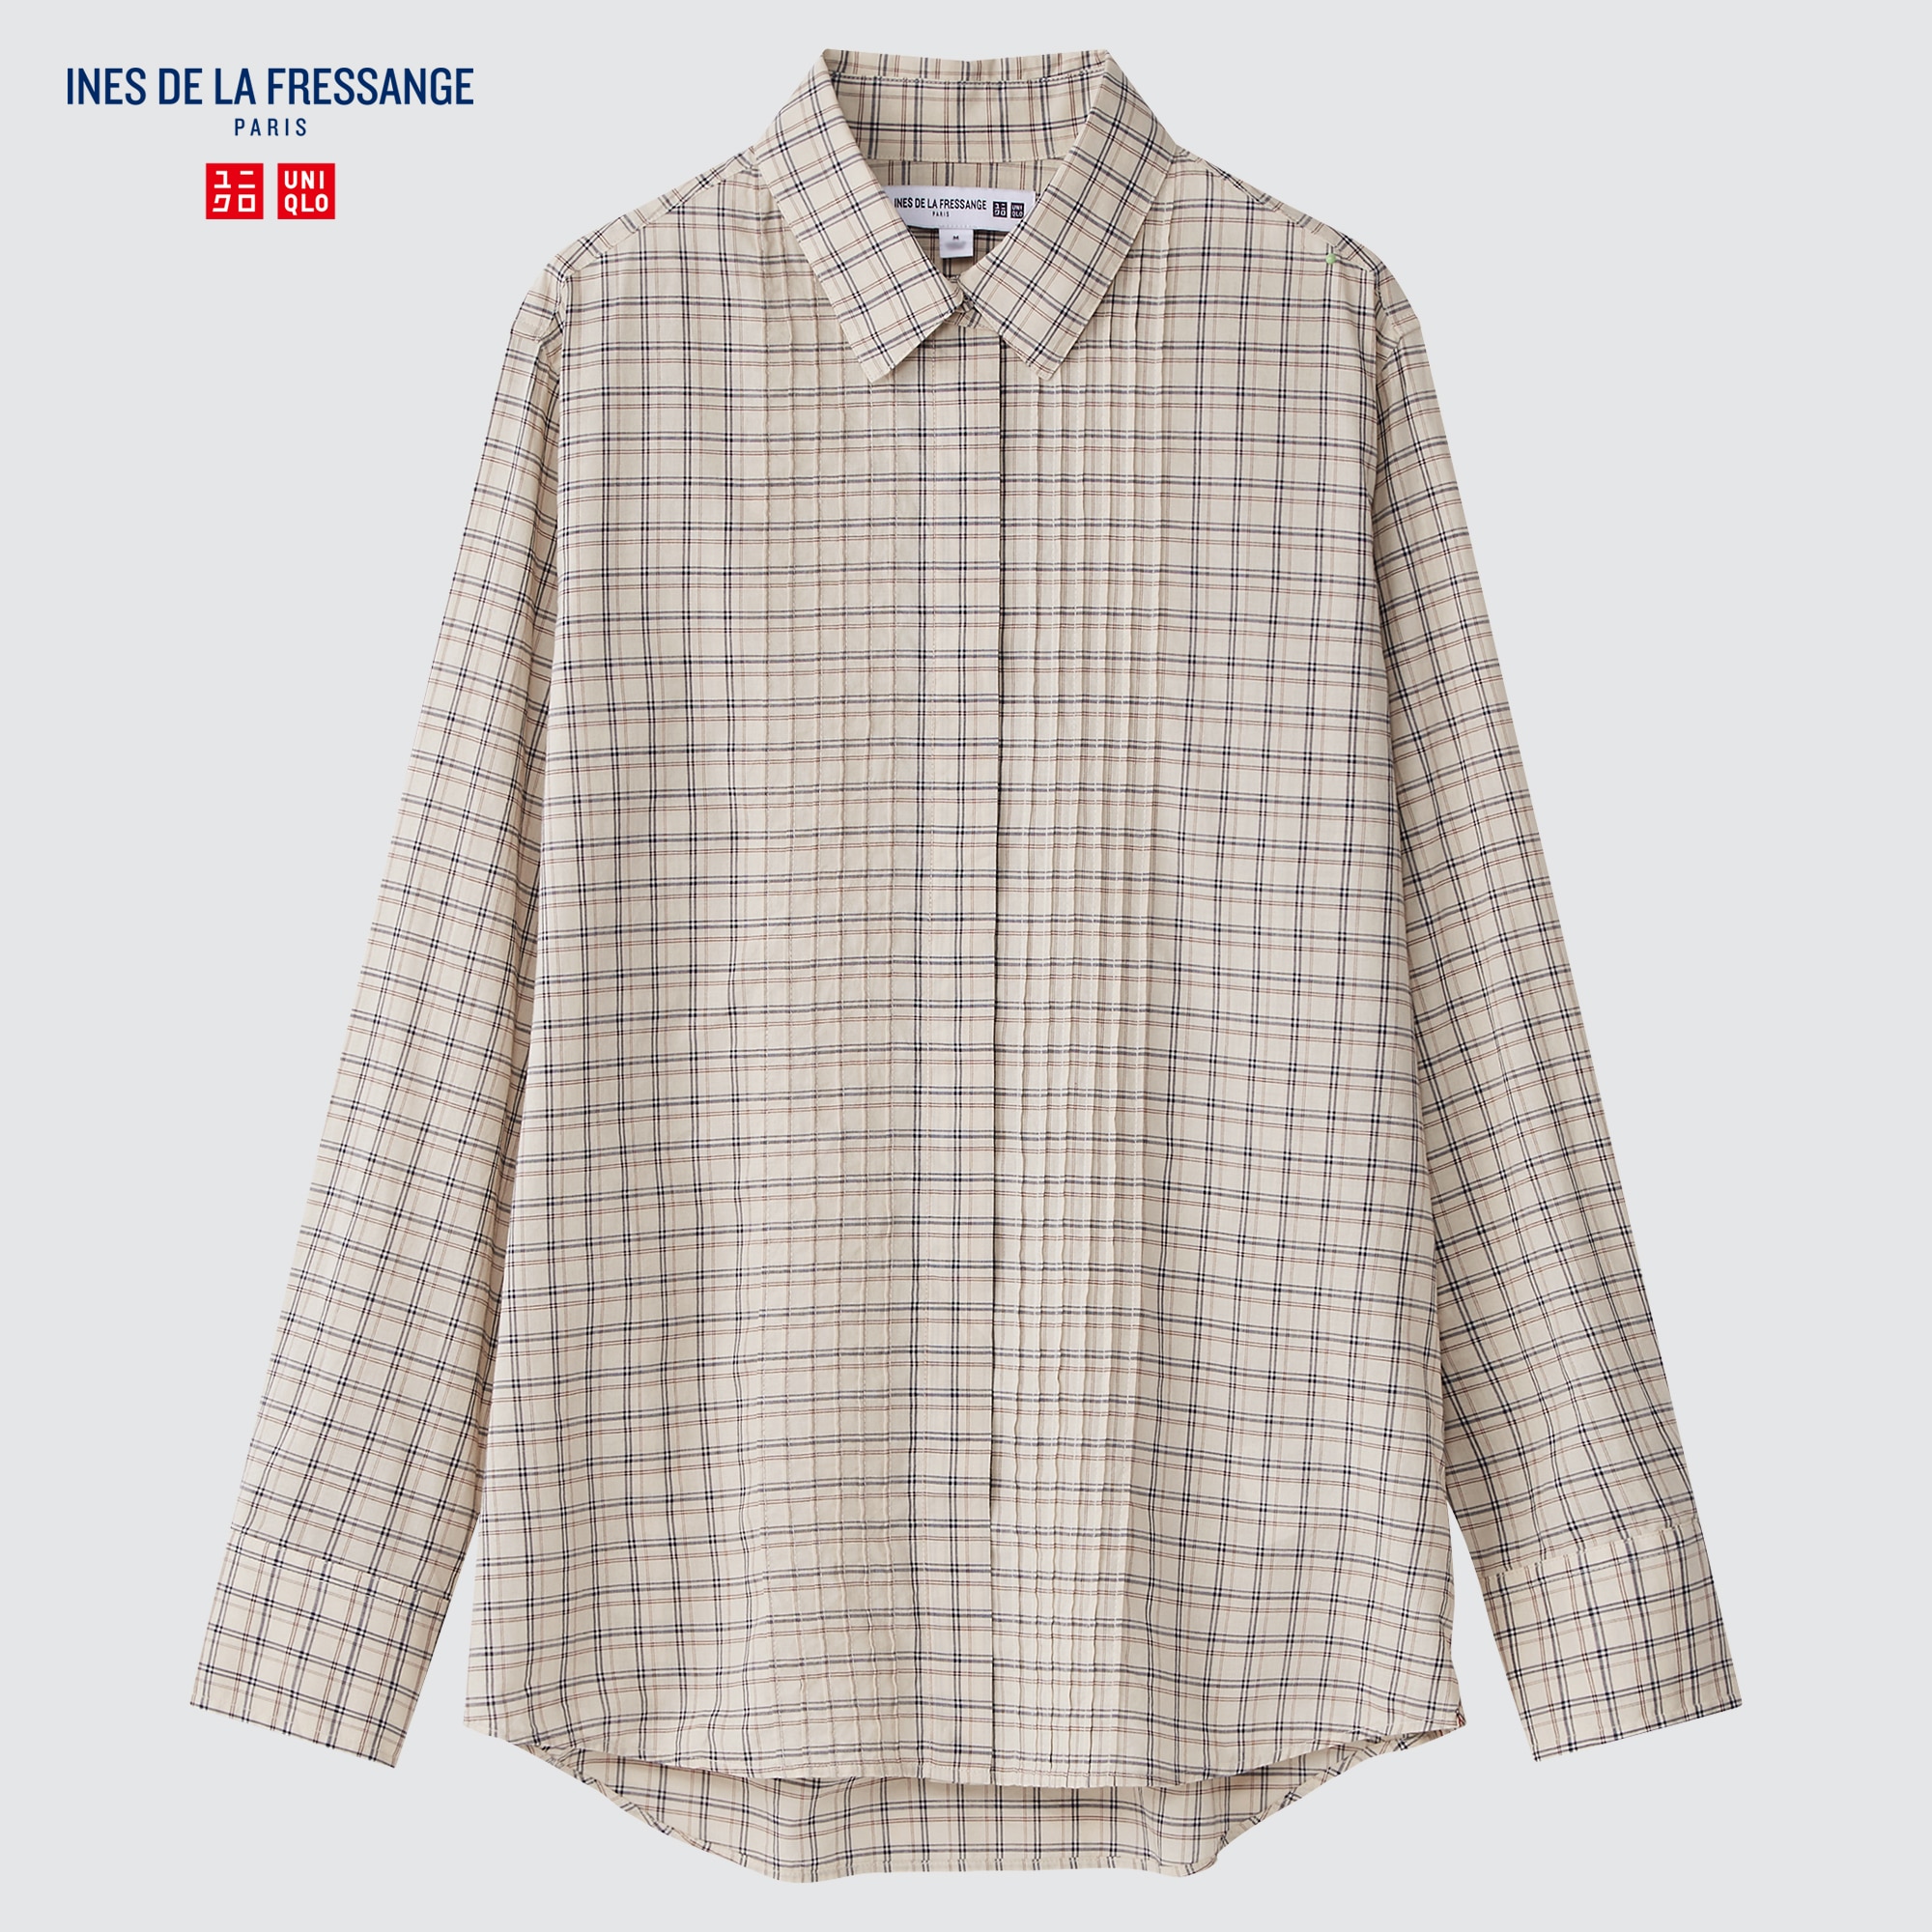 Uniqlo Linen Tops  Shirts for Women for sale  eBay